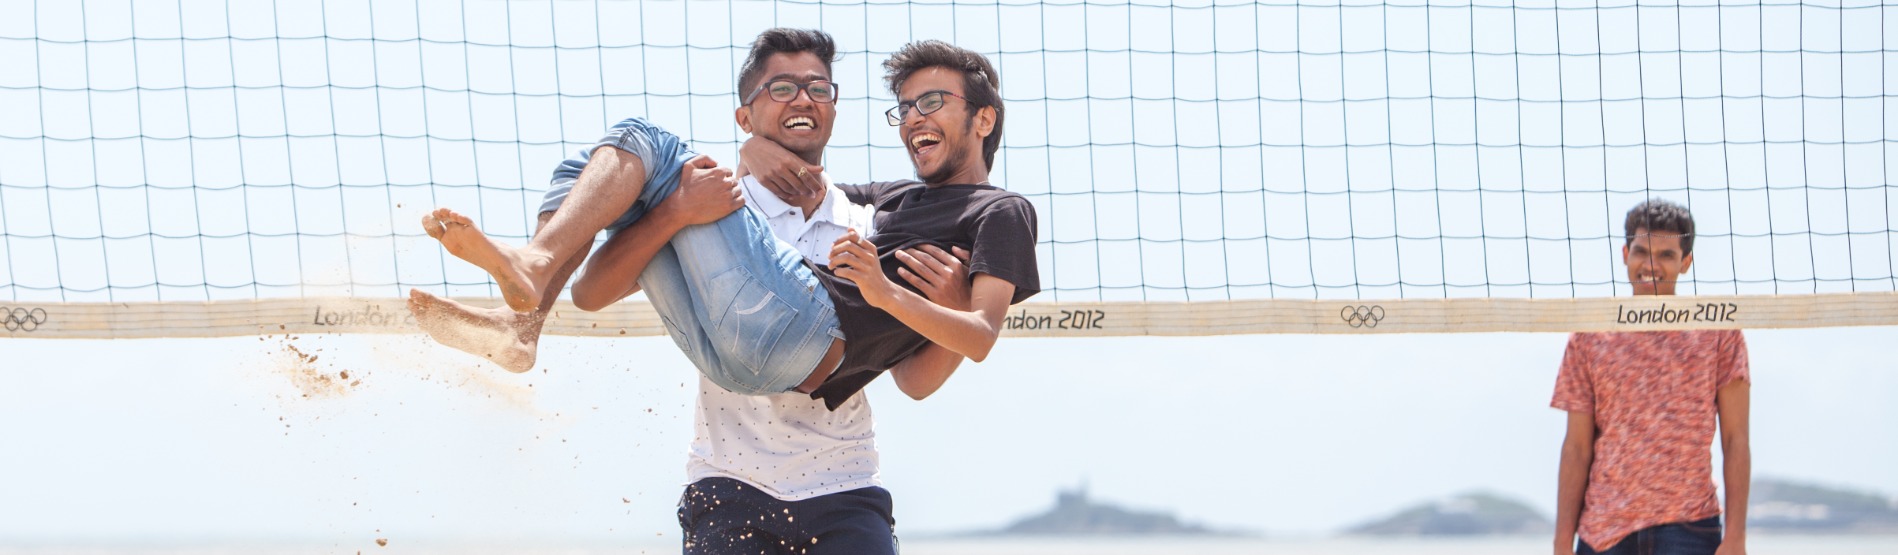 2 International students celebrating at a beach volleyball game in Swansea